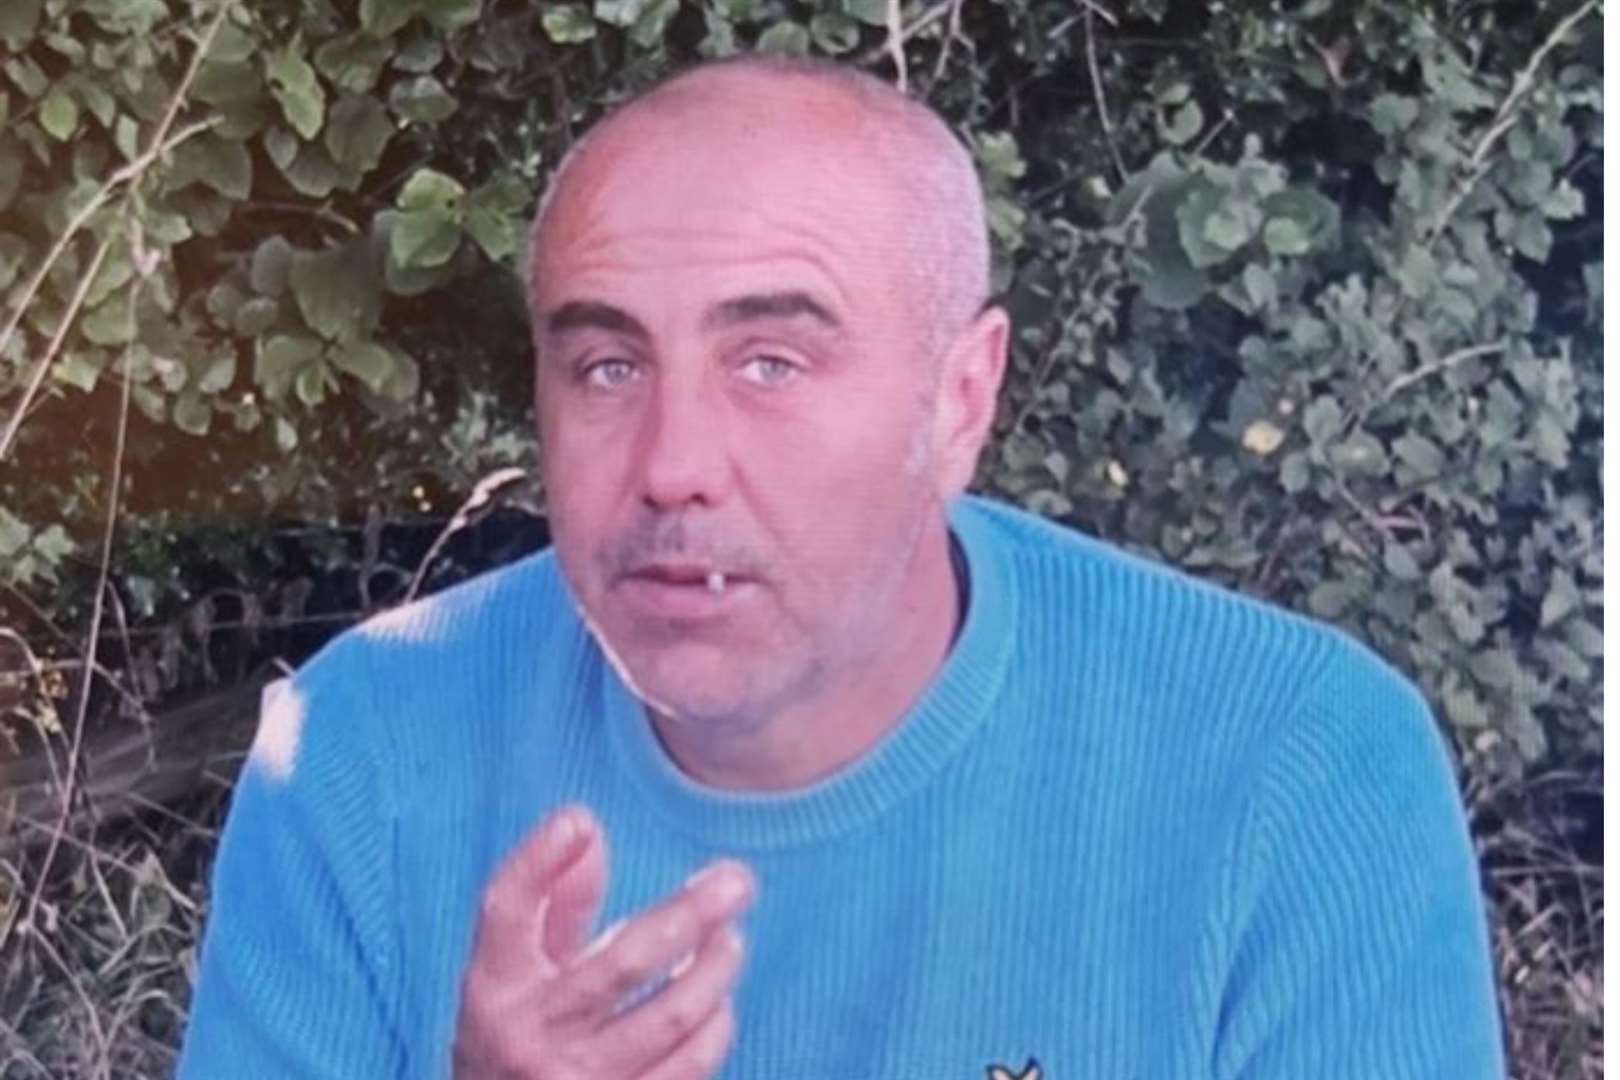 The body of John Macklin was found on the same day, less than three miles away in another part of Ashford. Picture: Kent Police